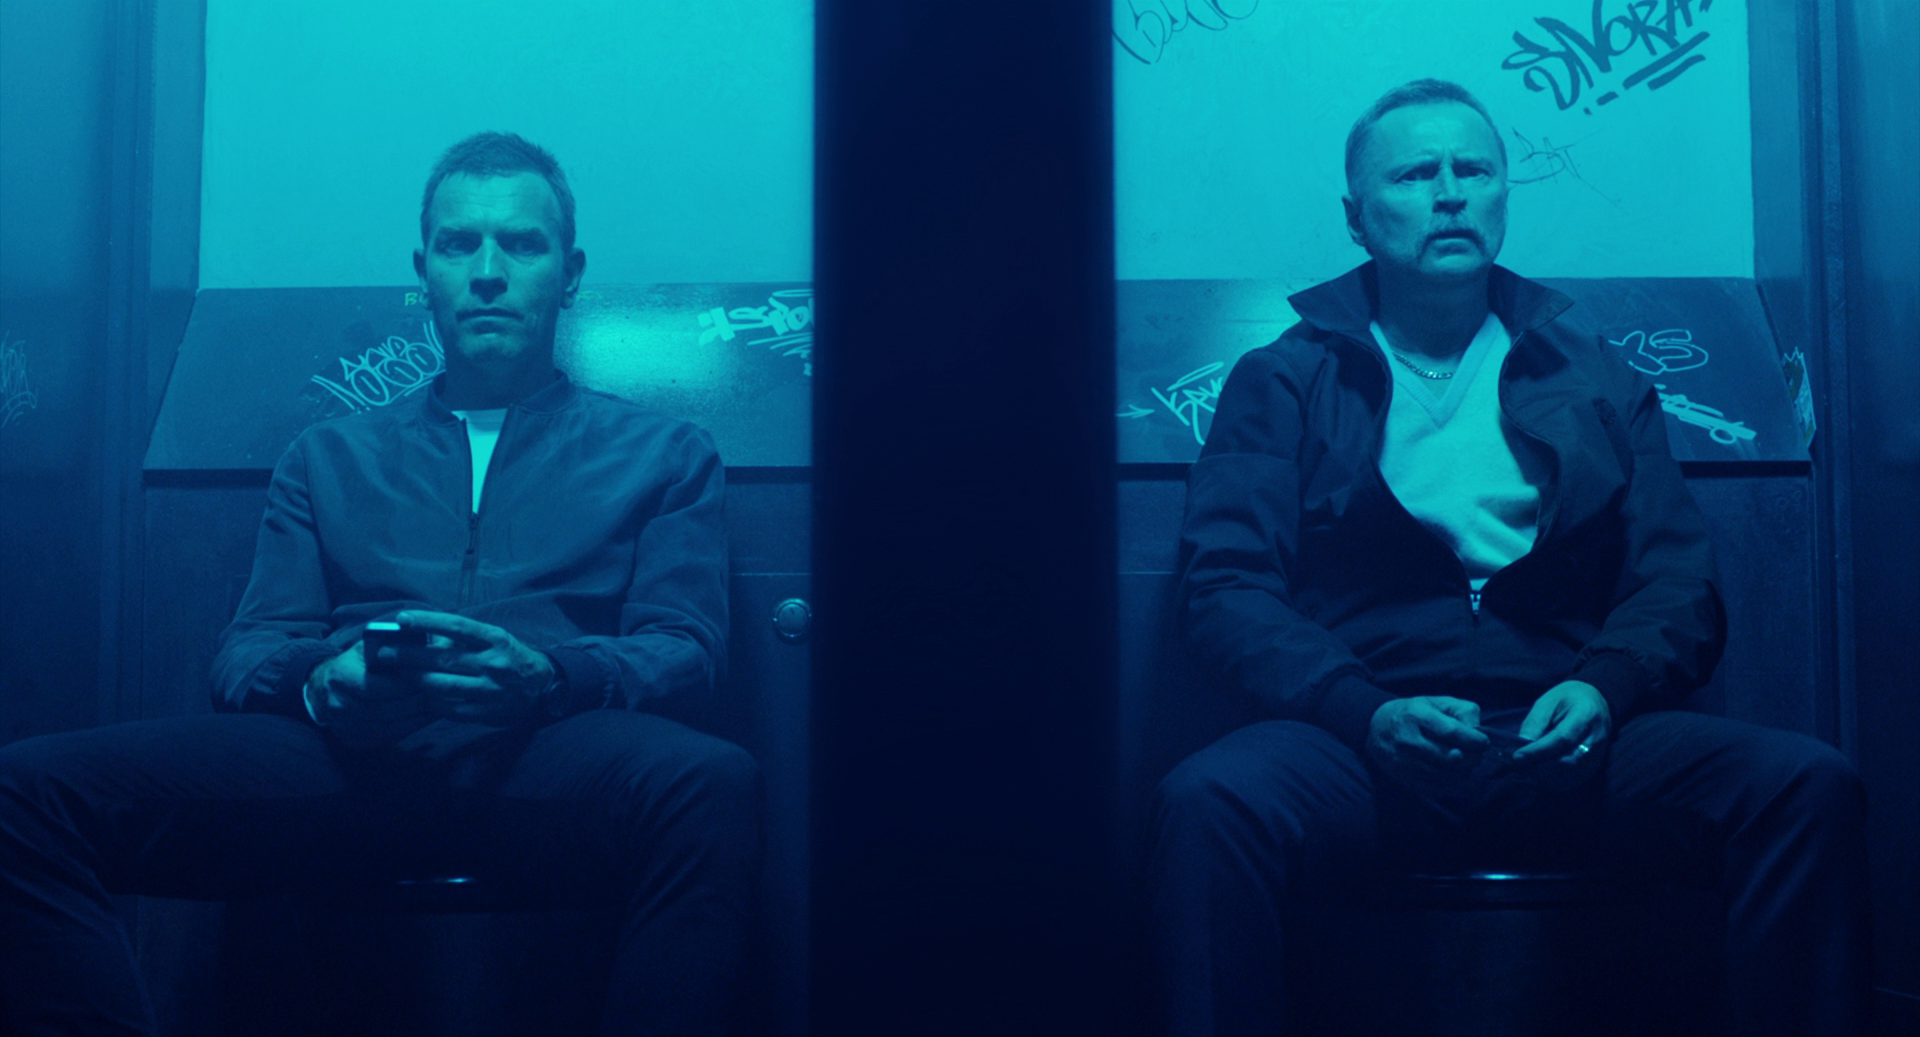 T2 Trainspotting,' now on DVD and Blu-ray (review) 